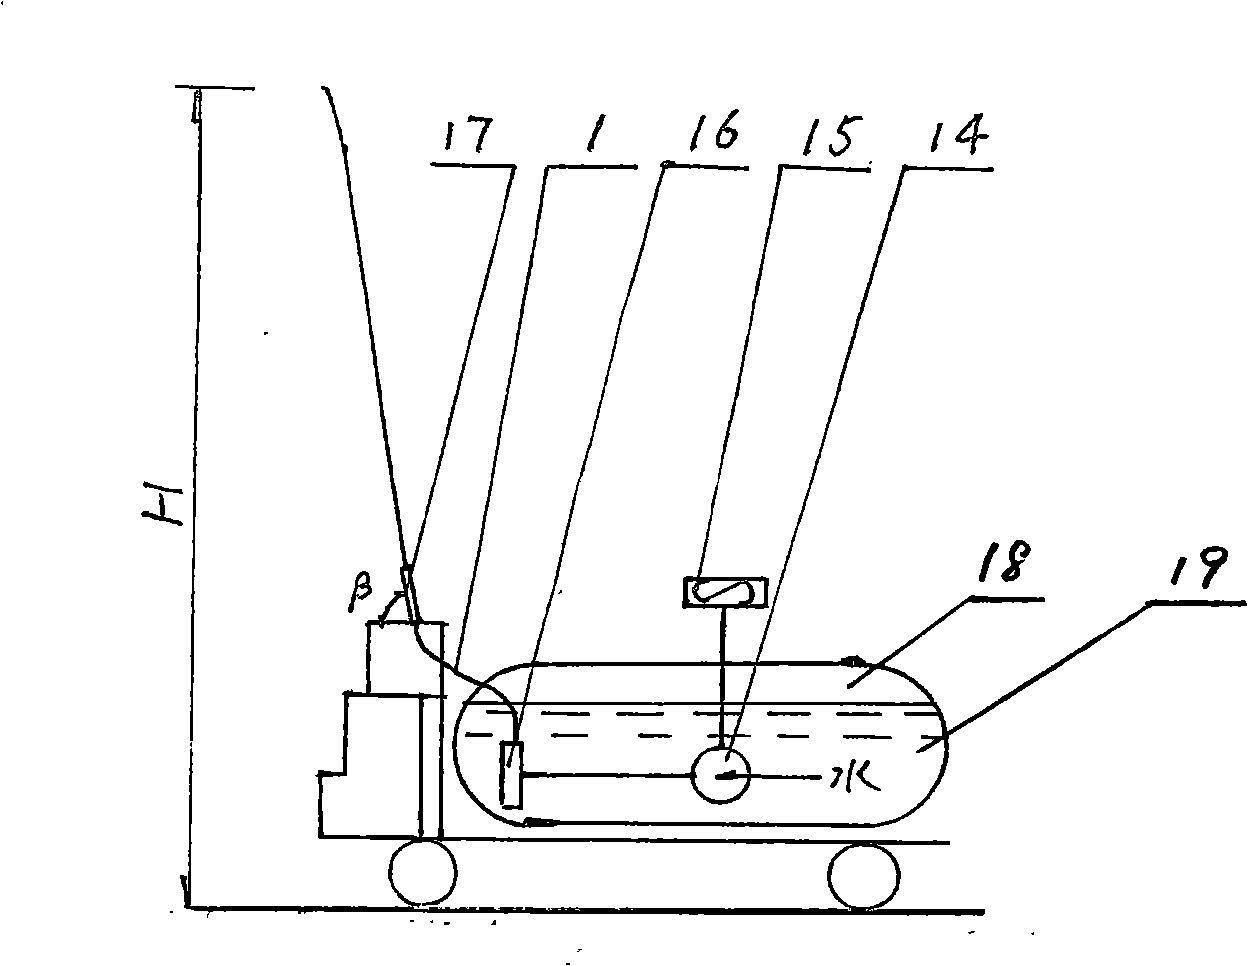 Ejector device